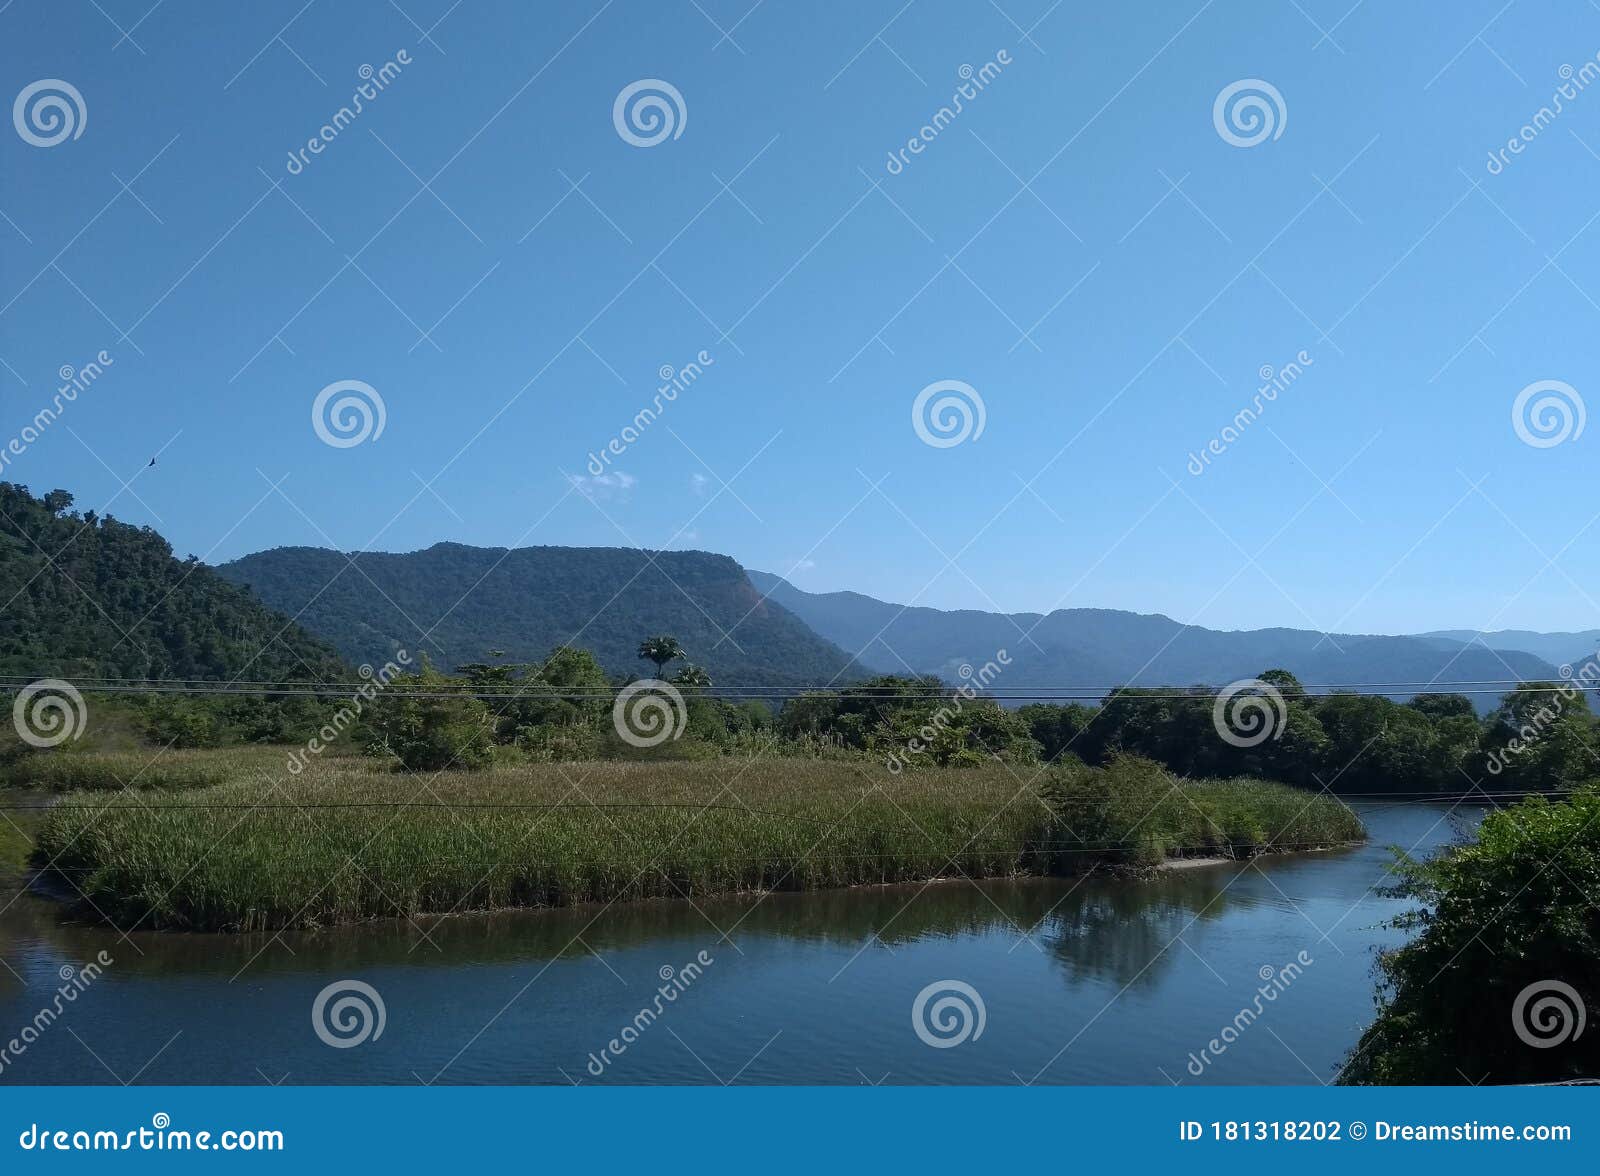 river with mountain, and blue sky background.